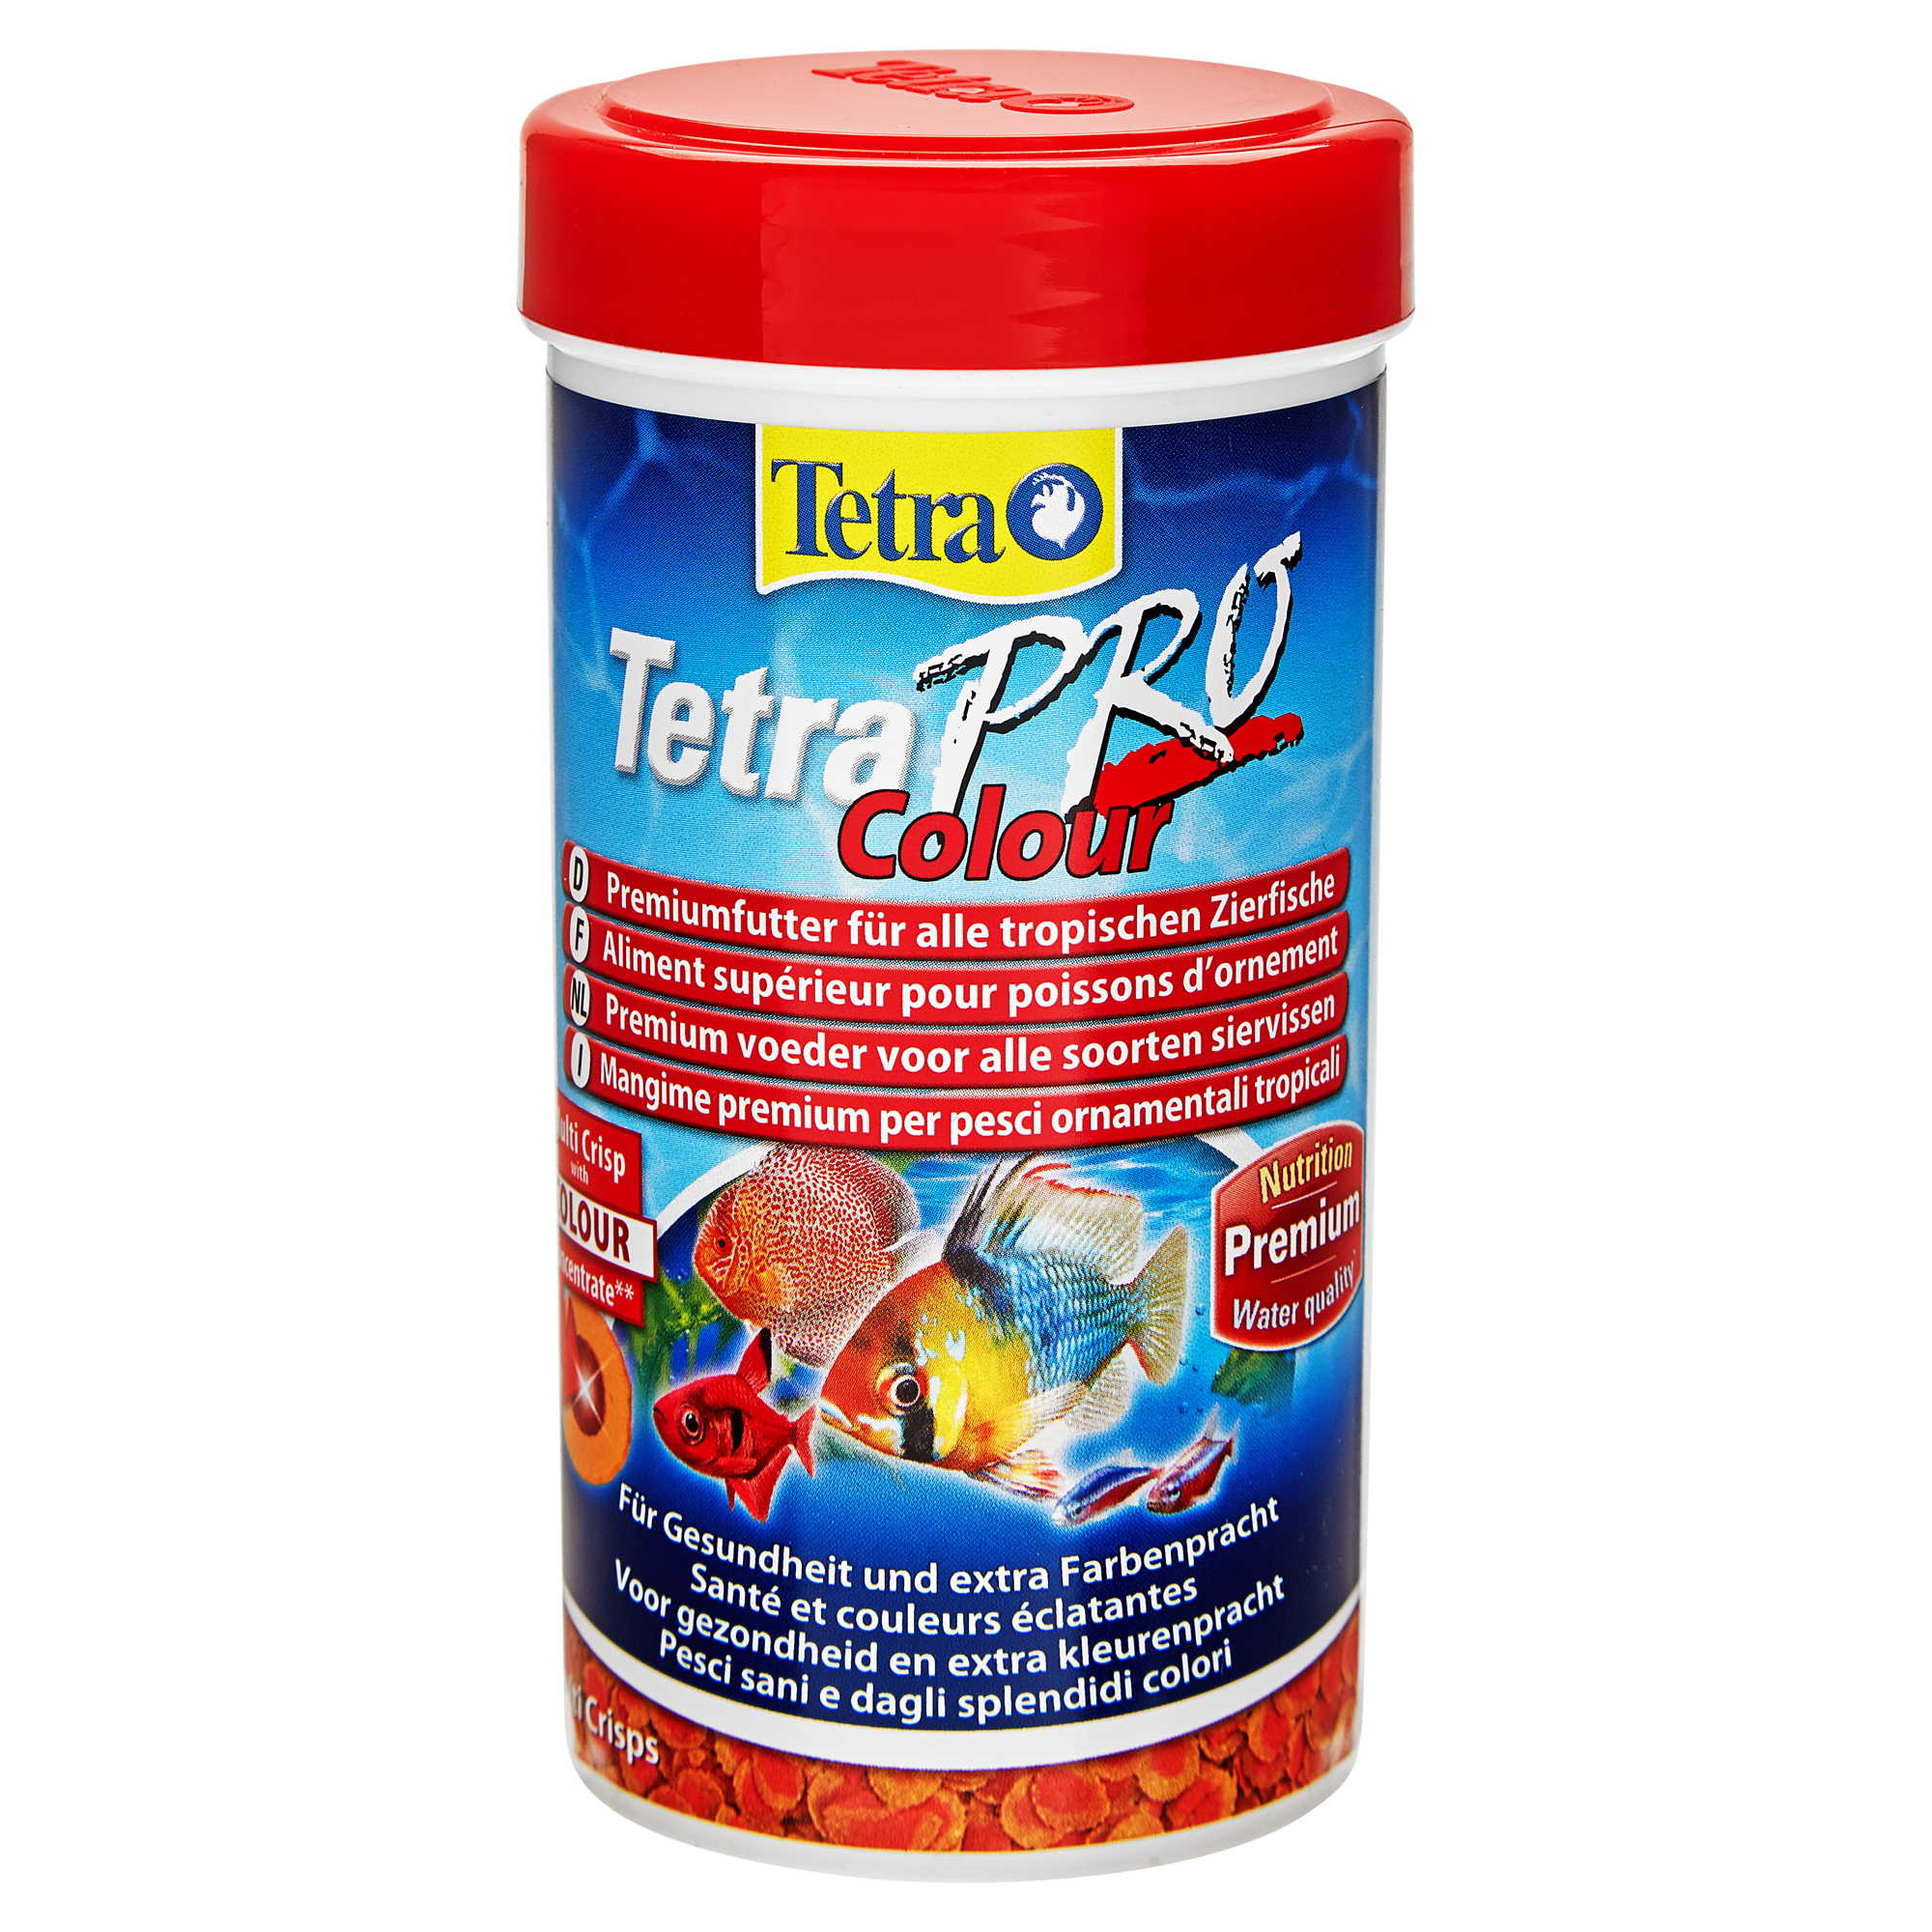 Fischfutter "Pro" Tetra Colour 55 g + product picture